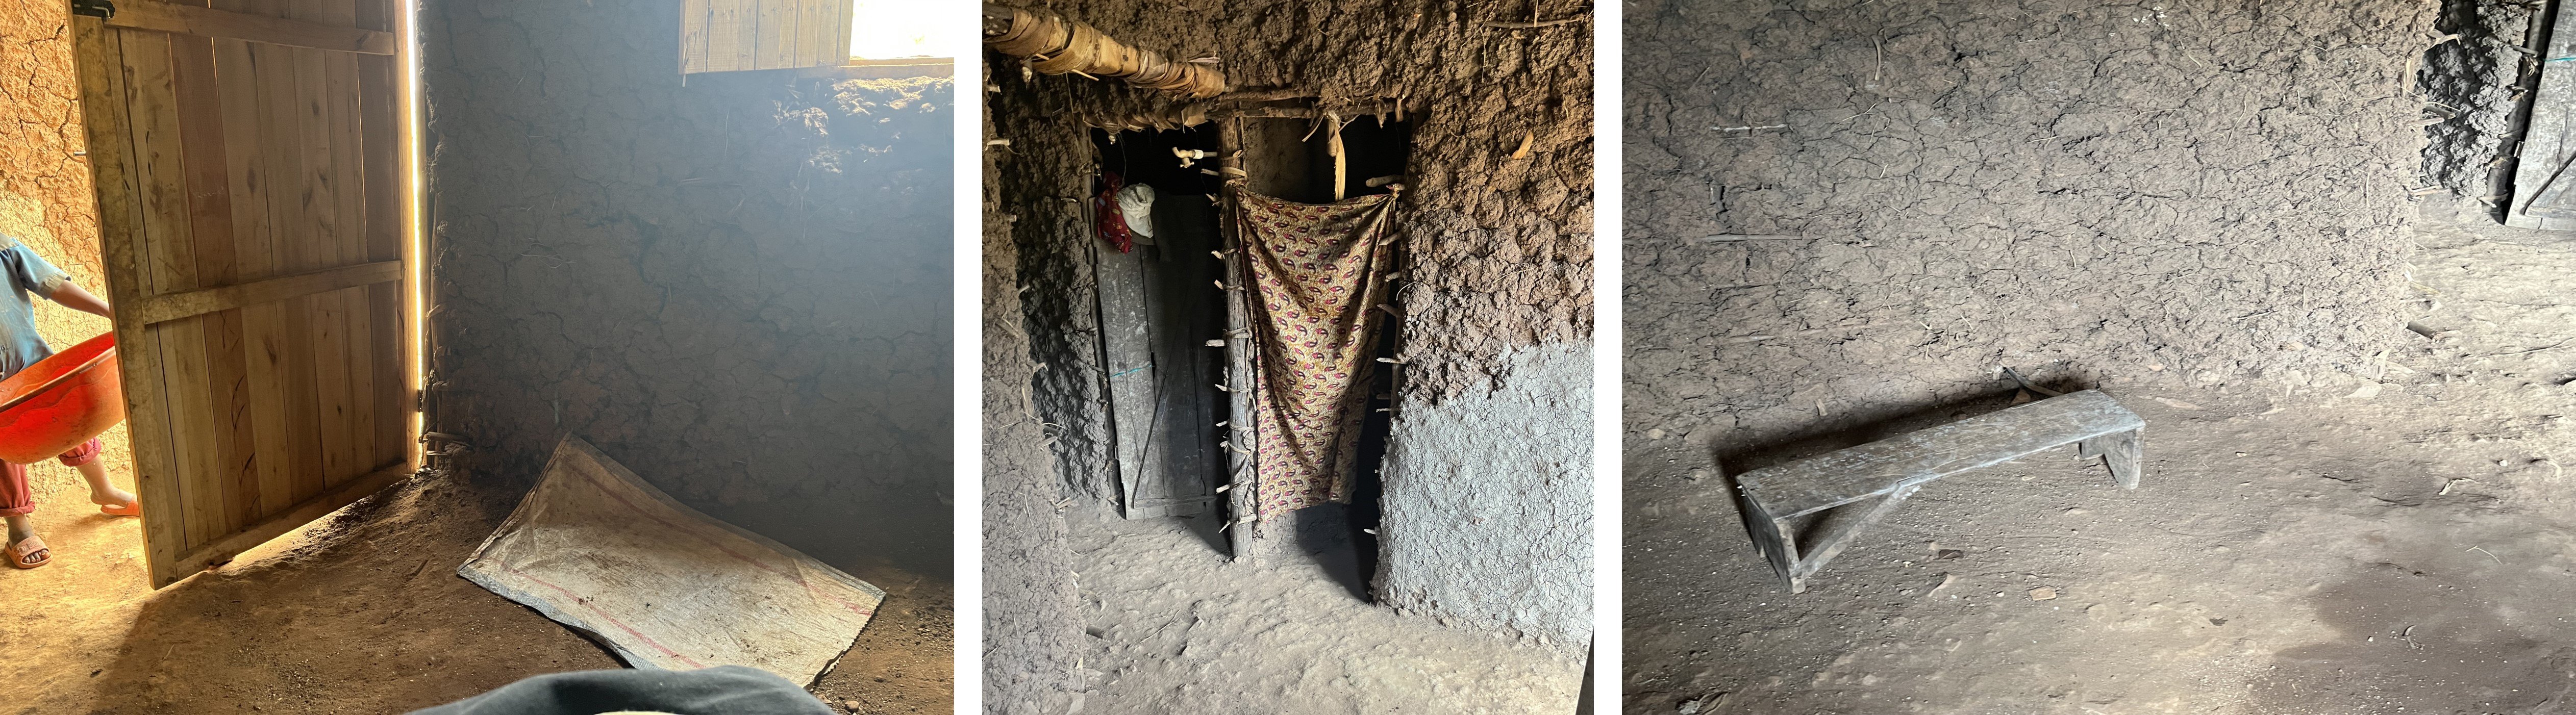 Three pictures. Each depicts a different part of a study participant's house in Rwanda.